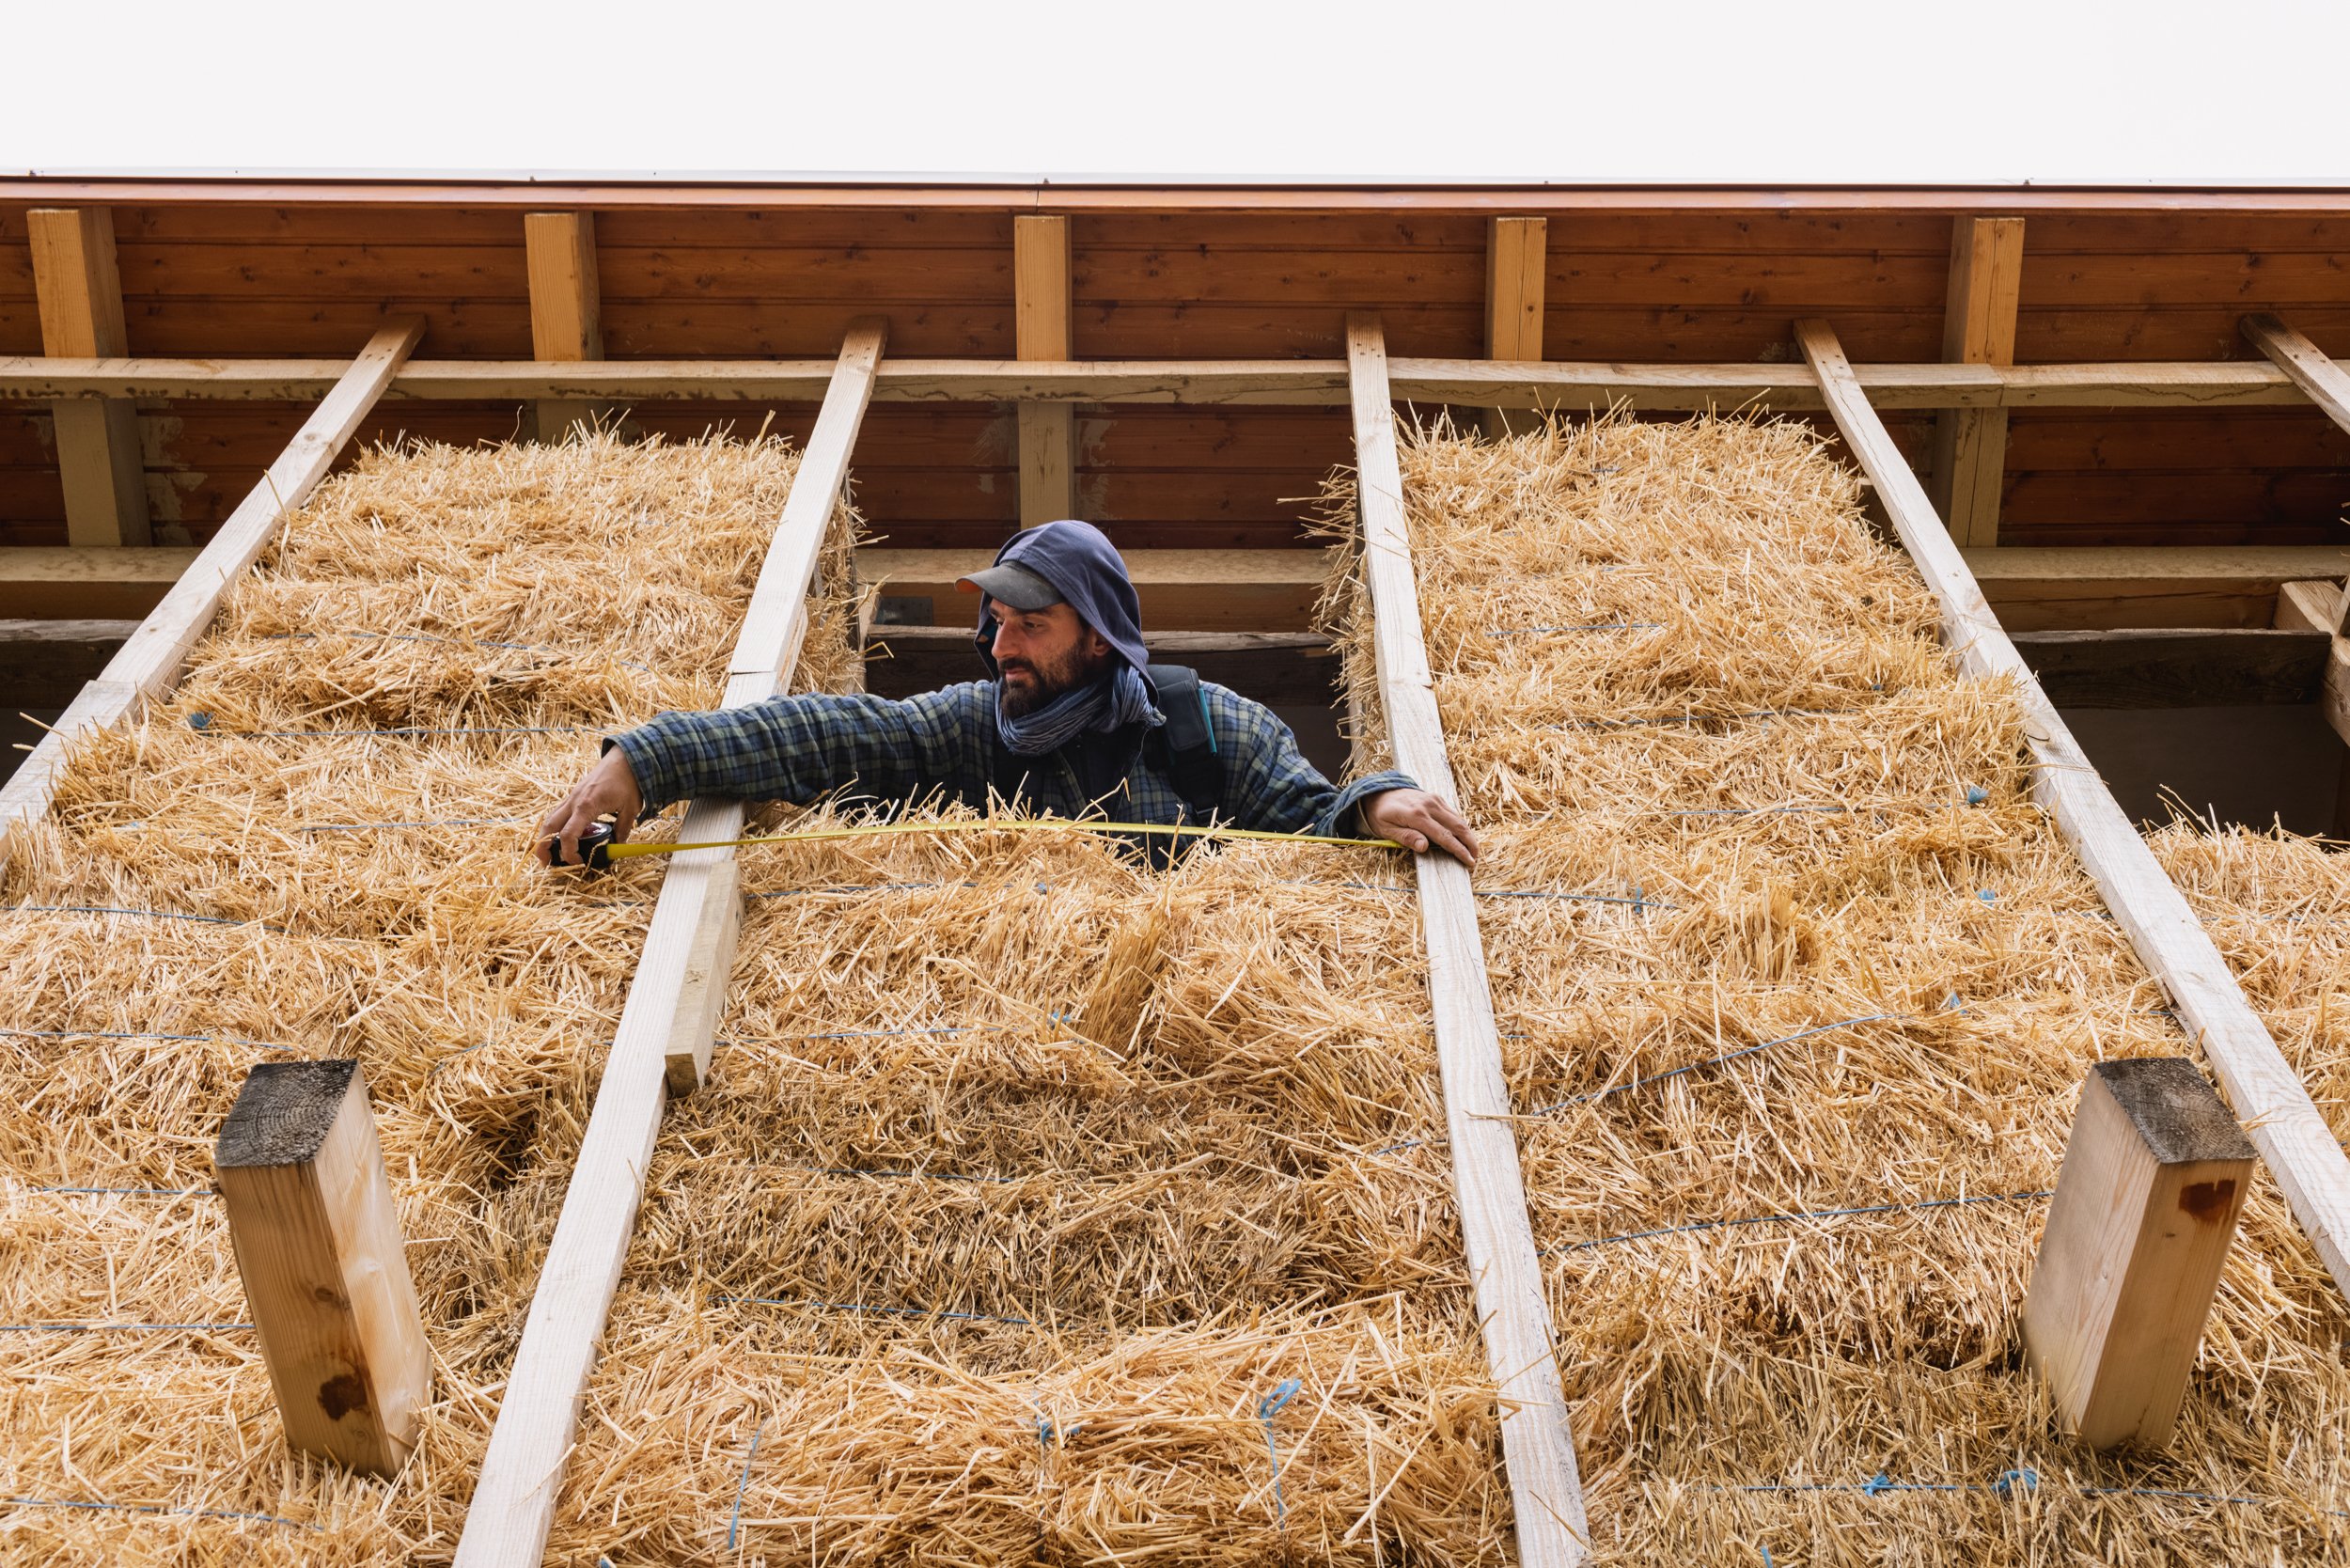  György Guti voluteer measuring the distance of straw-bales of the straw and mud house under construction in the outskirts of Nyim on September 25, 2022. 